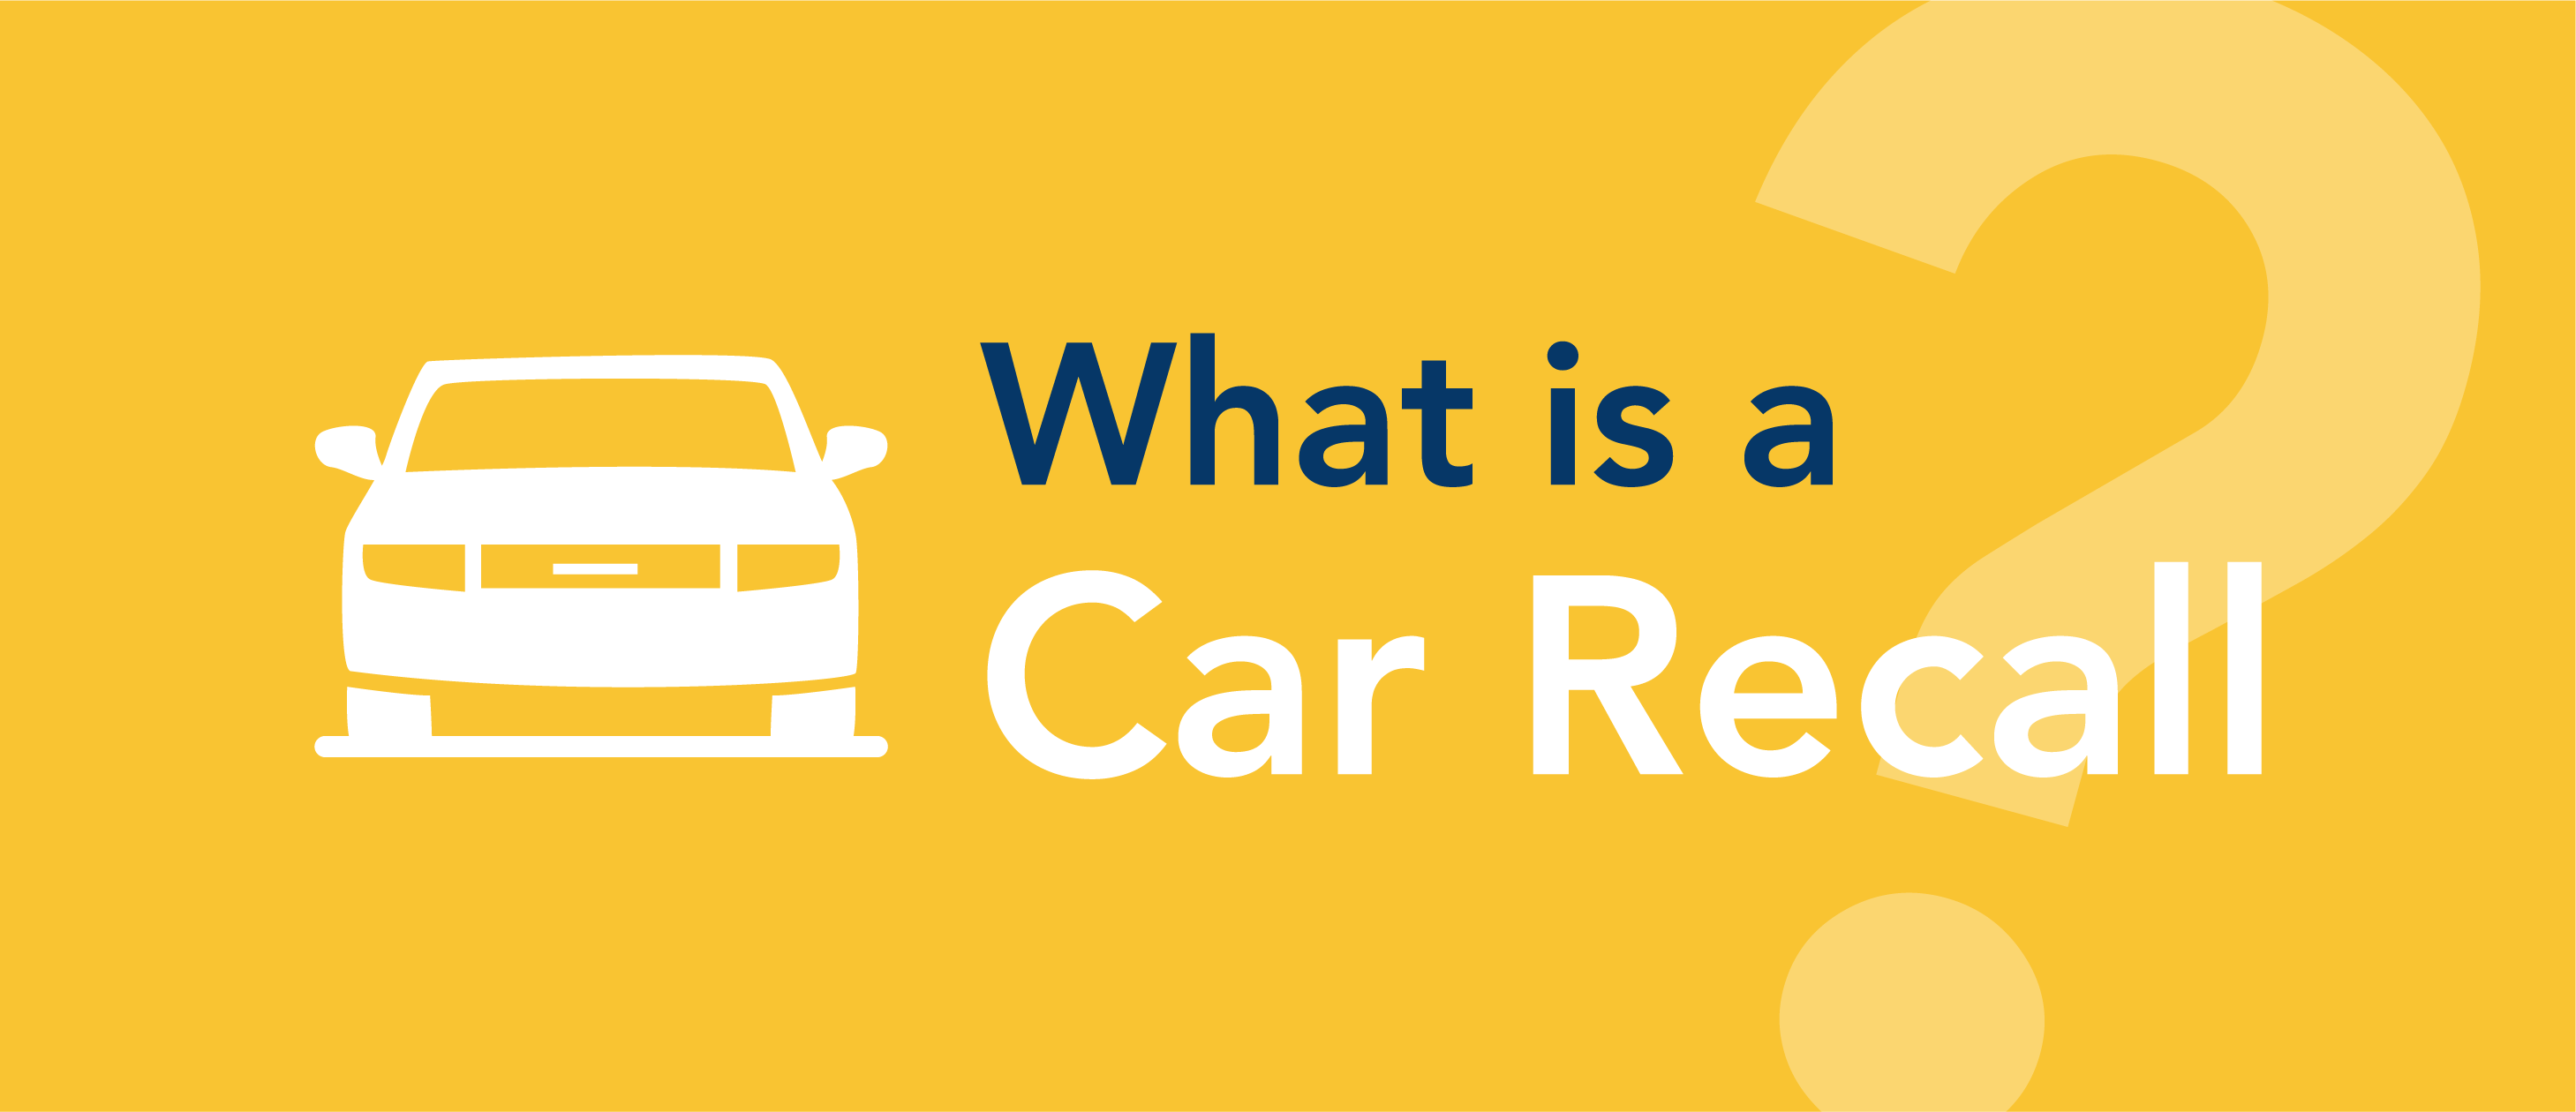 What is a car recall?